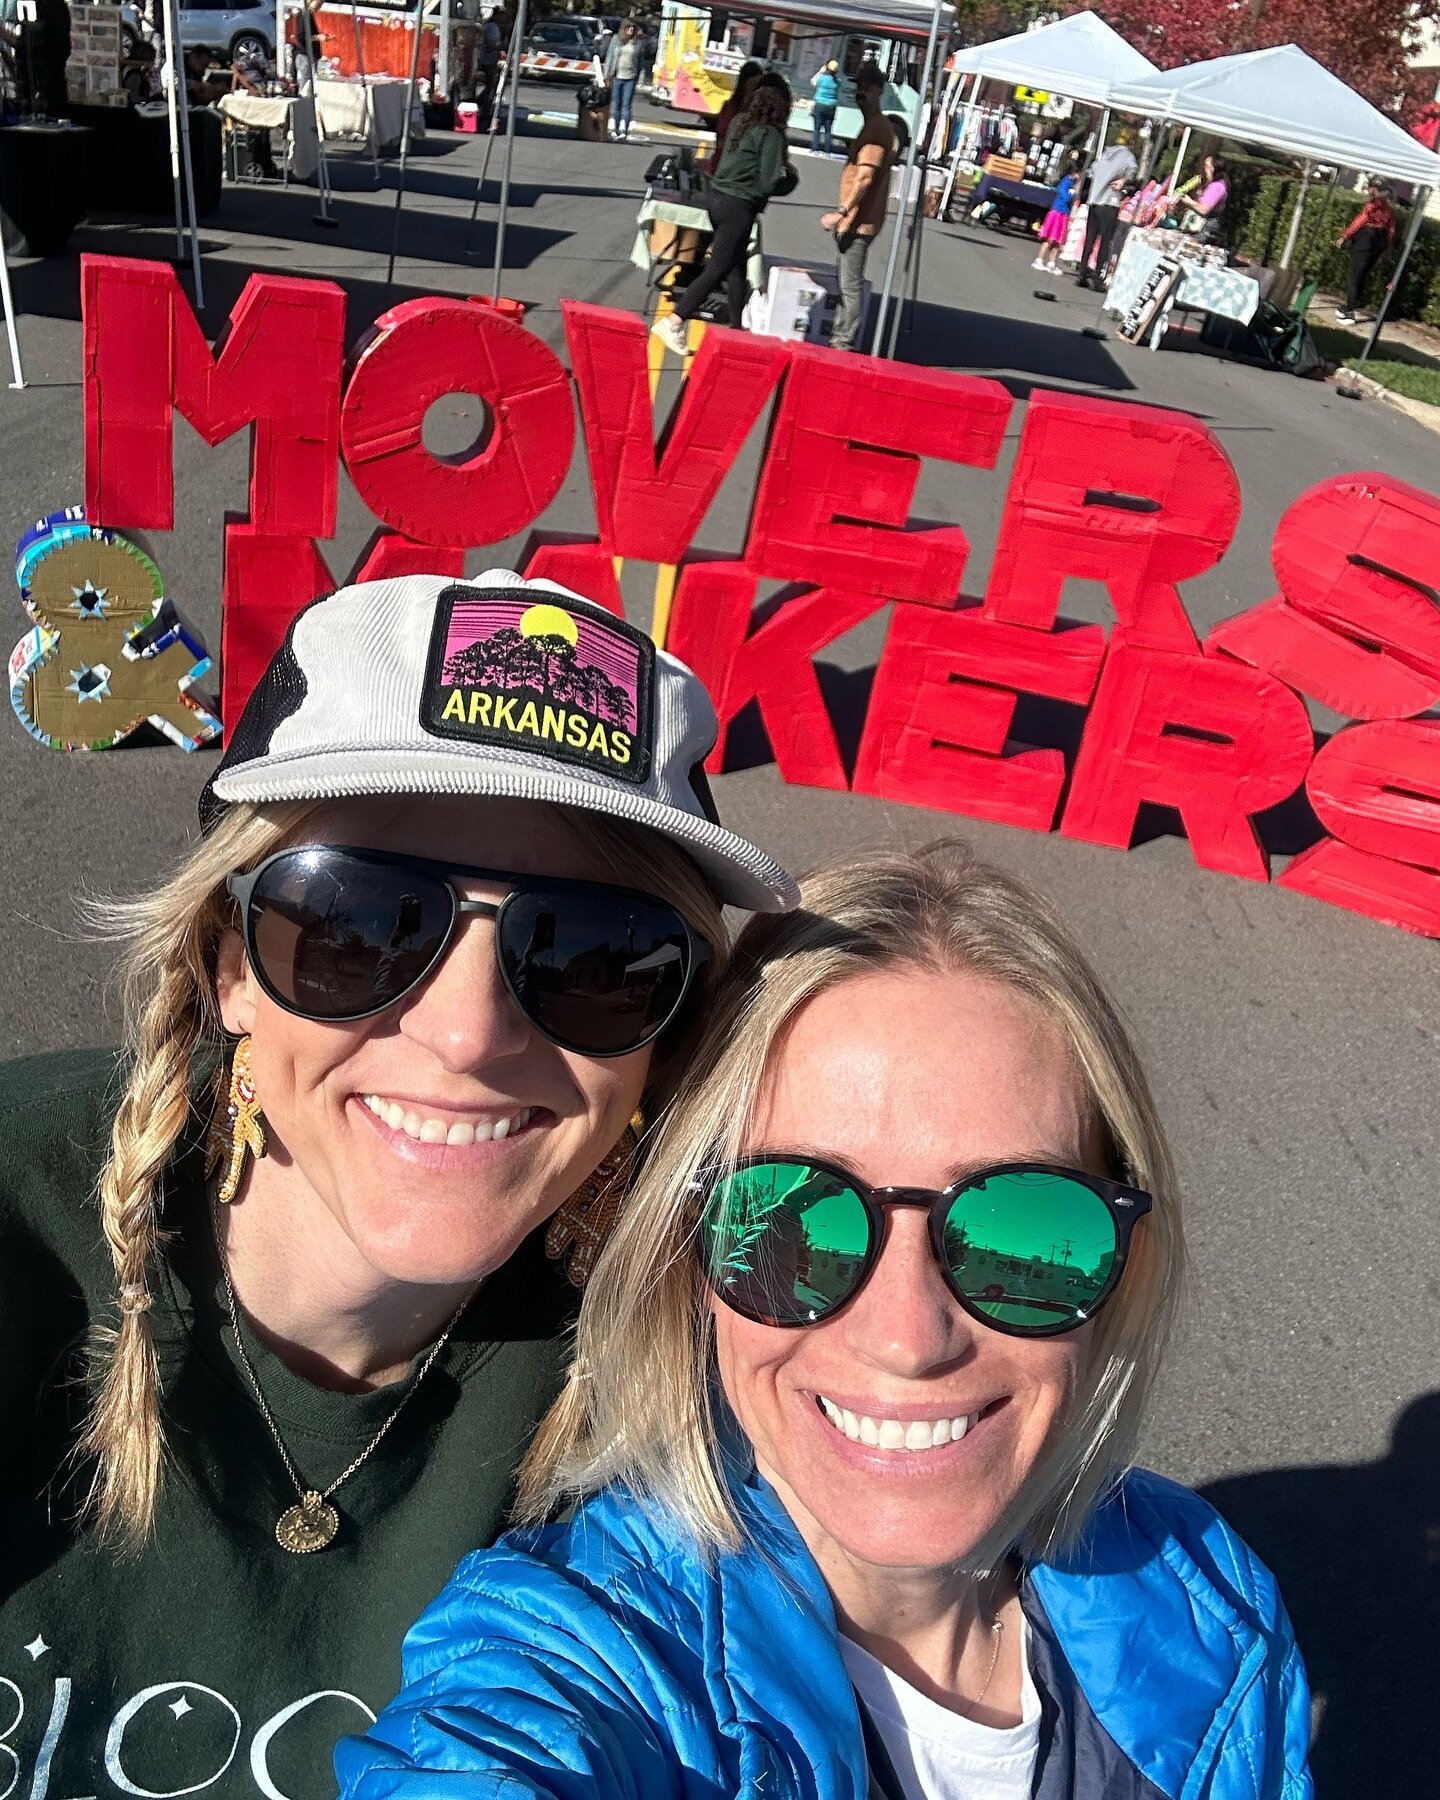 Y&rsquo;all come down to the movers and makers market on Kavanaugh in Hillcrest today! Get started on your Christmas list, support some local artisans AND Youth Home.